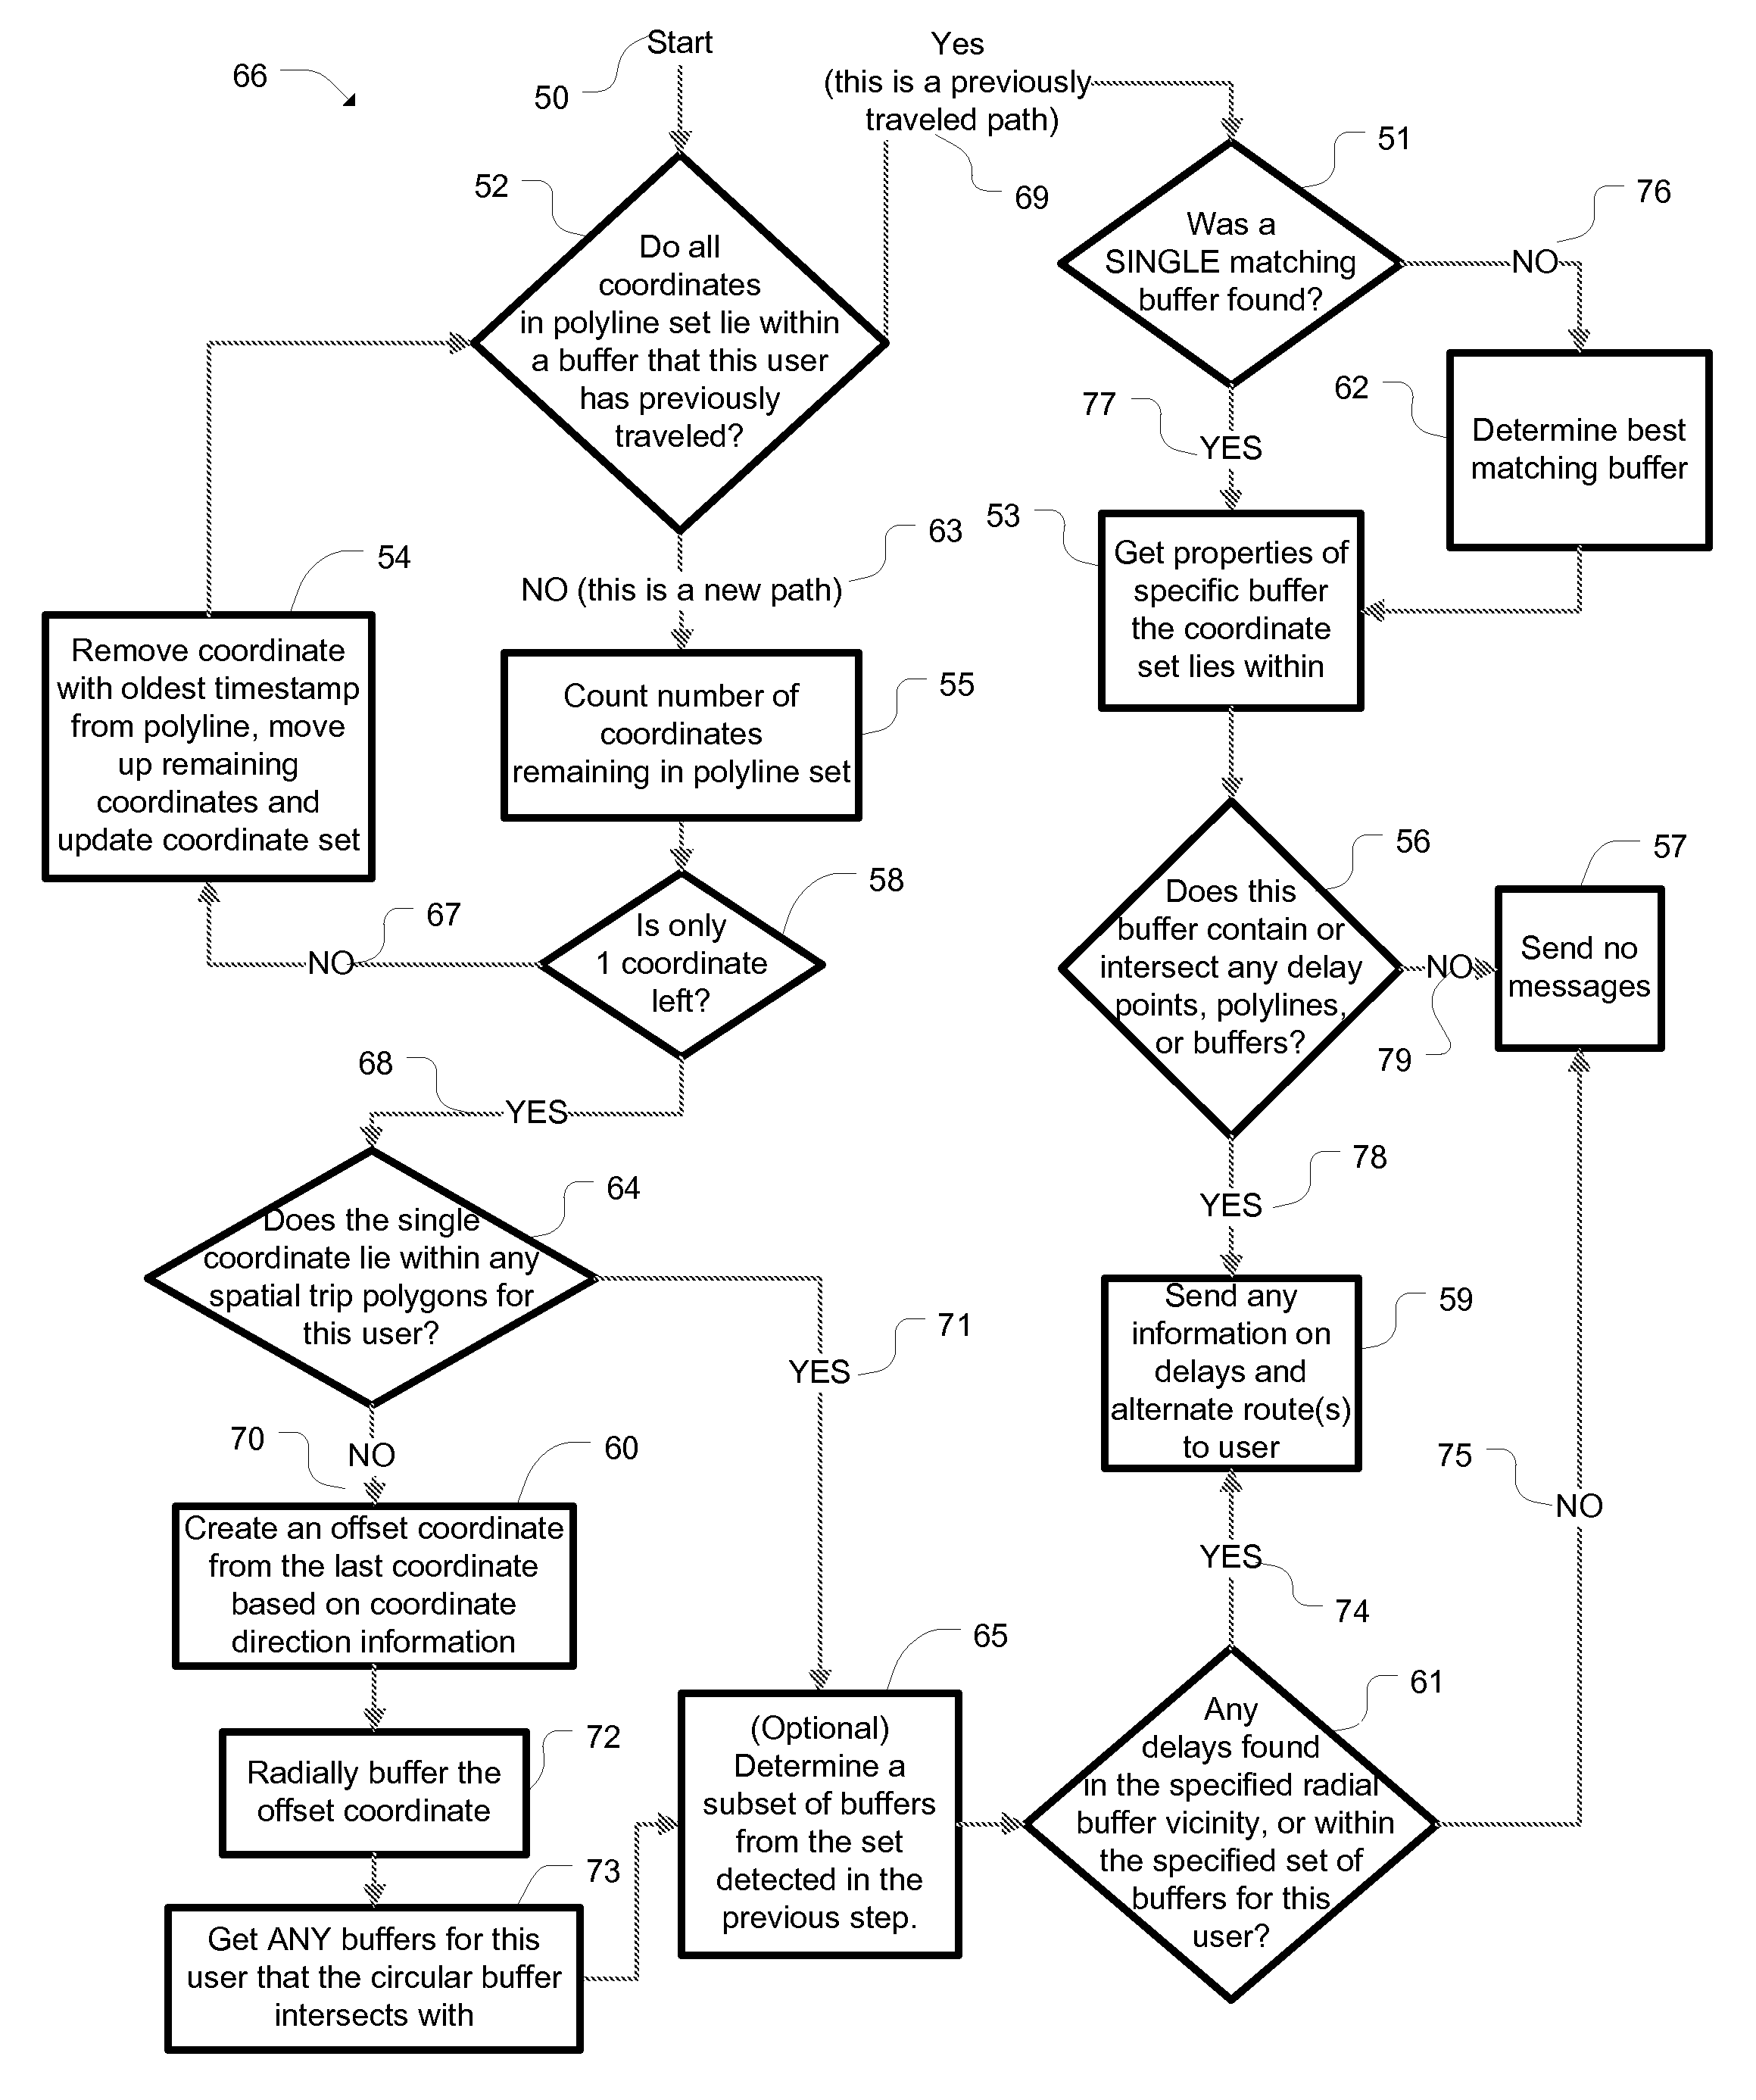 System and method for real-time travel path prediction and automatic incident alerts